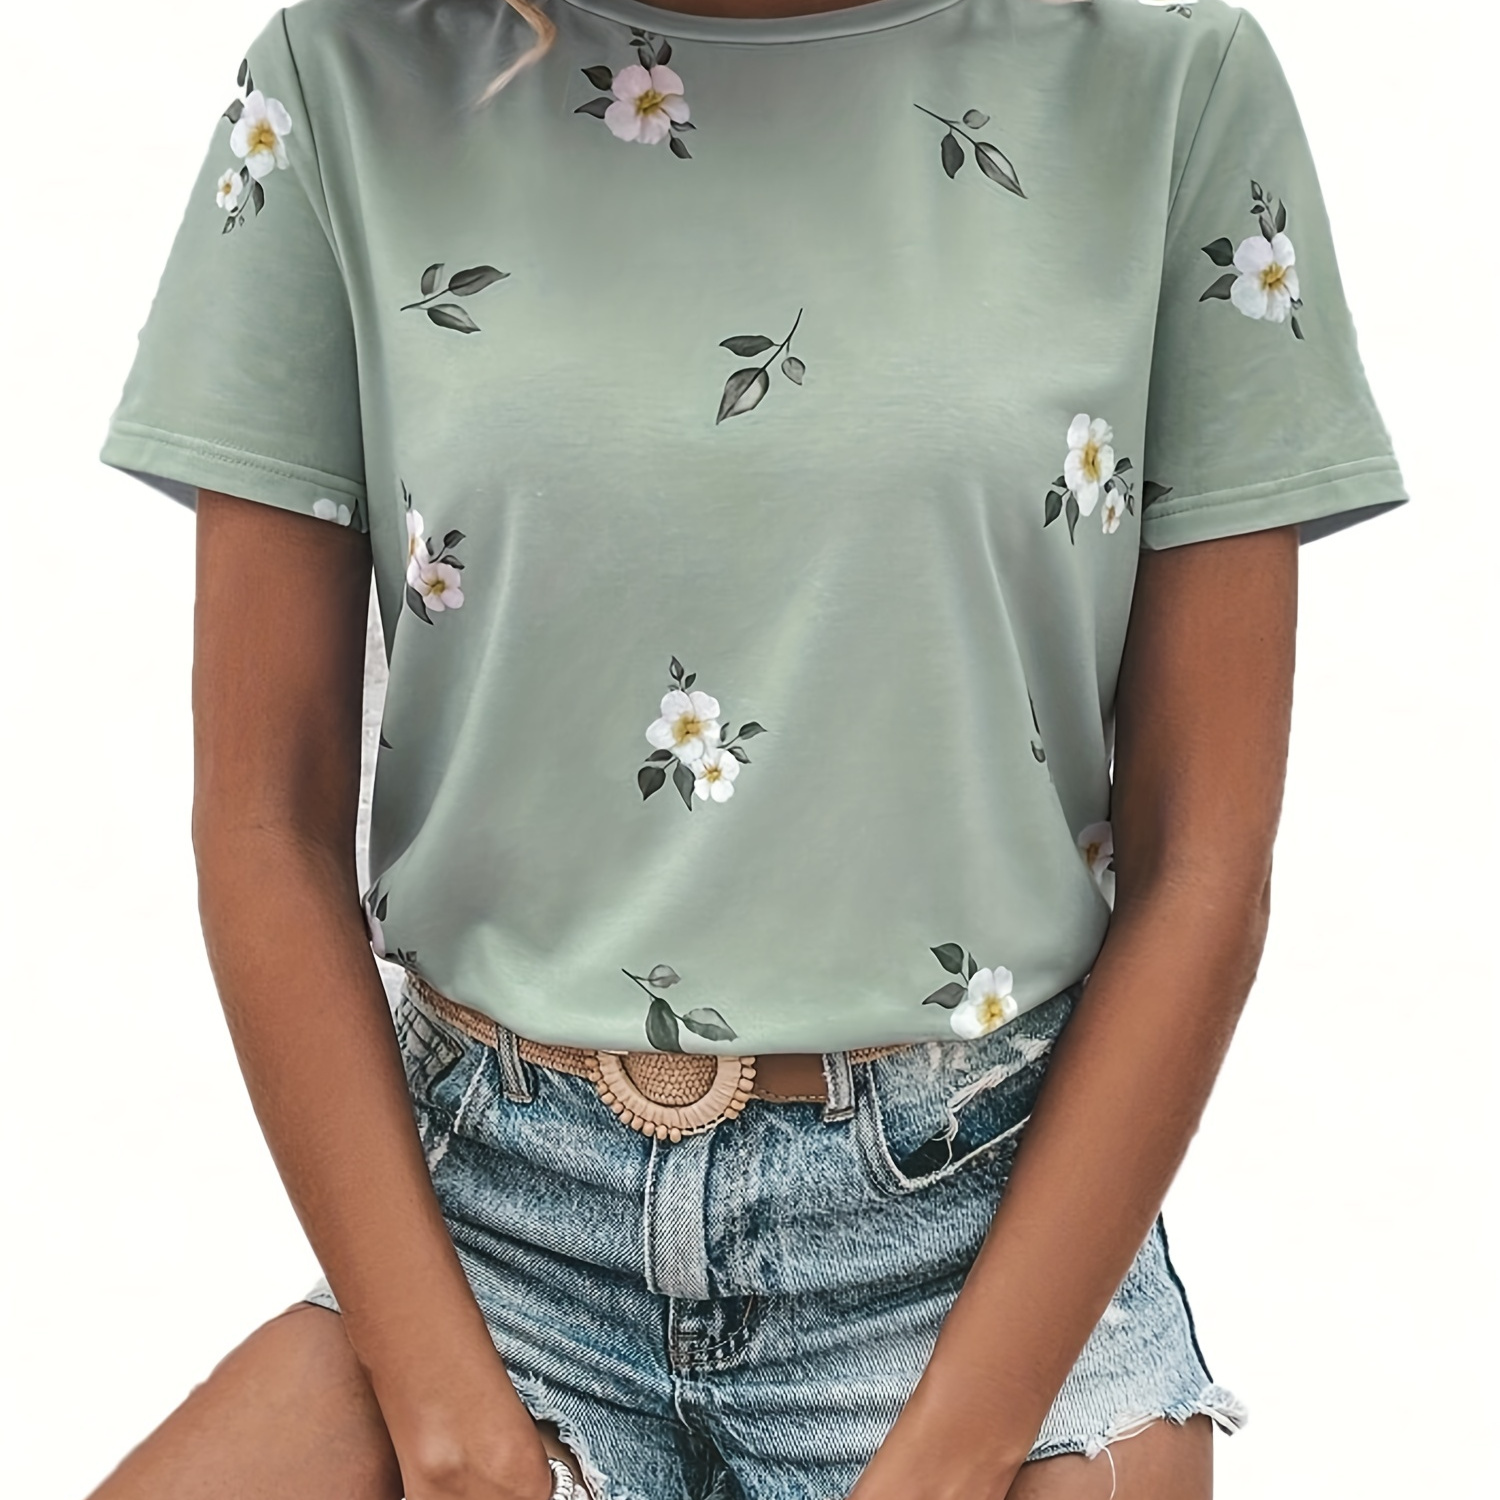 

Floral Print Crew Neck T-shirt, Casual Short Sleeve Top For Spring & Summer, Women's Clothing